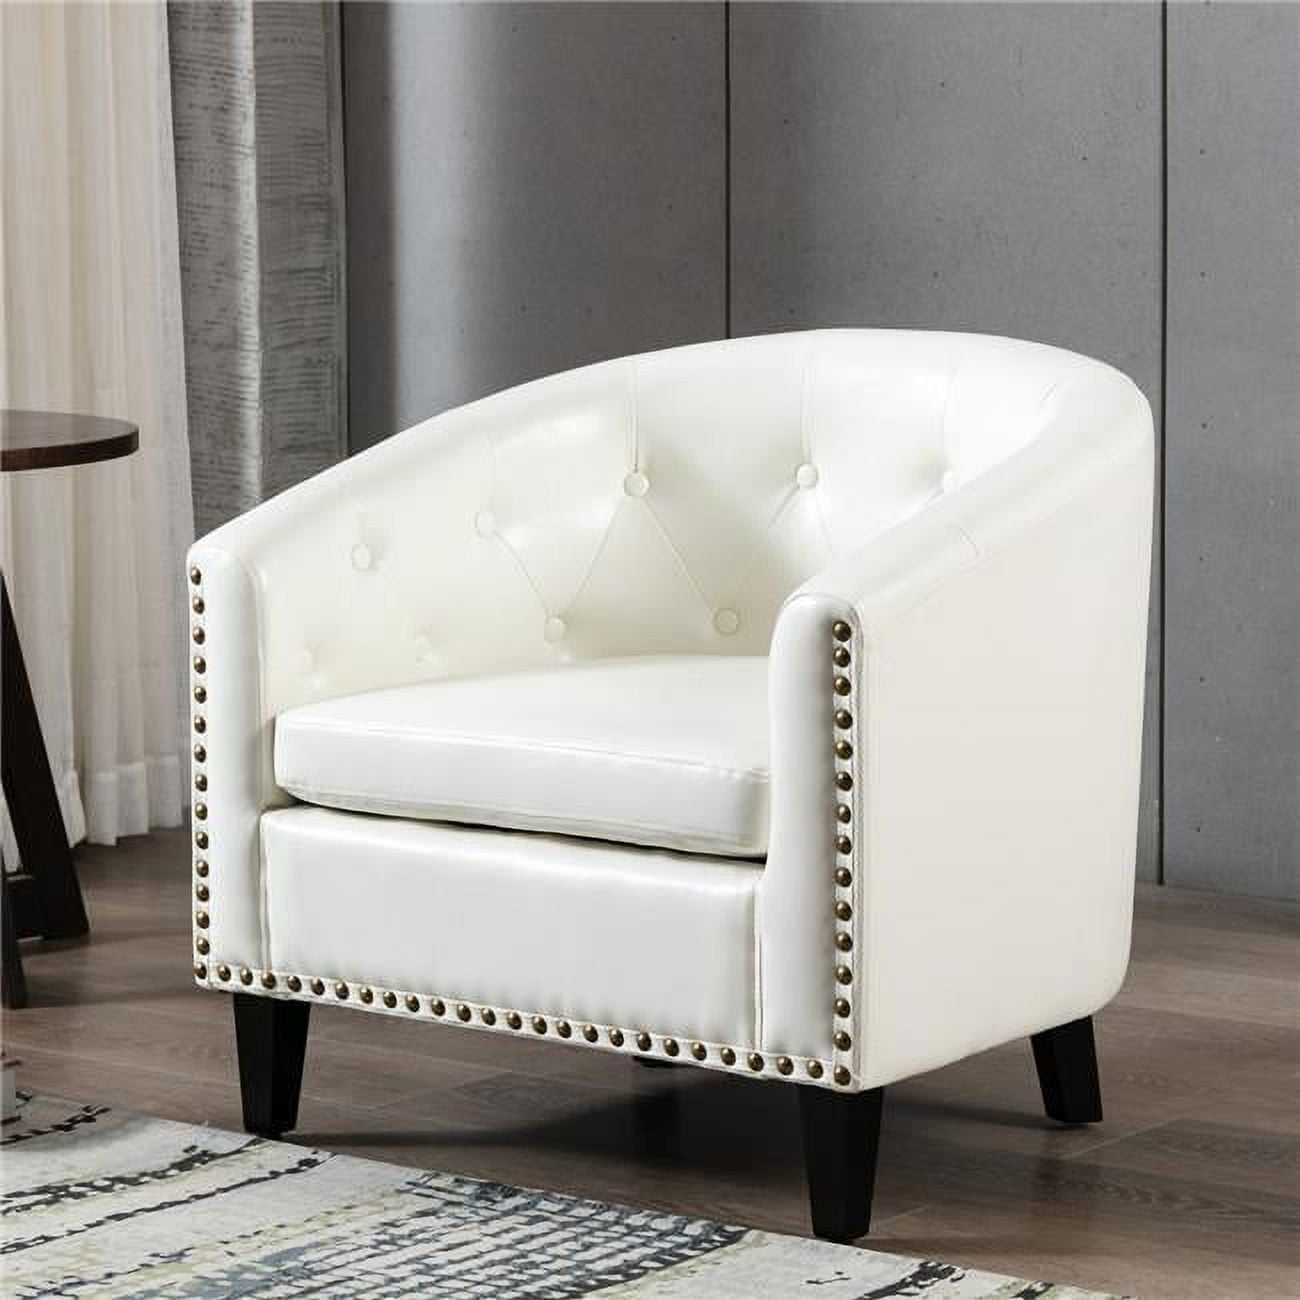 Picture of Direct Wicker UBS-WF212660AAB White PU Leather Tufted Barrel Chair Tub Chair for Living Room Bedroom Club Chairs